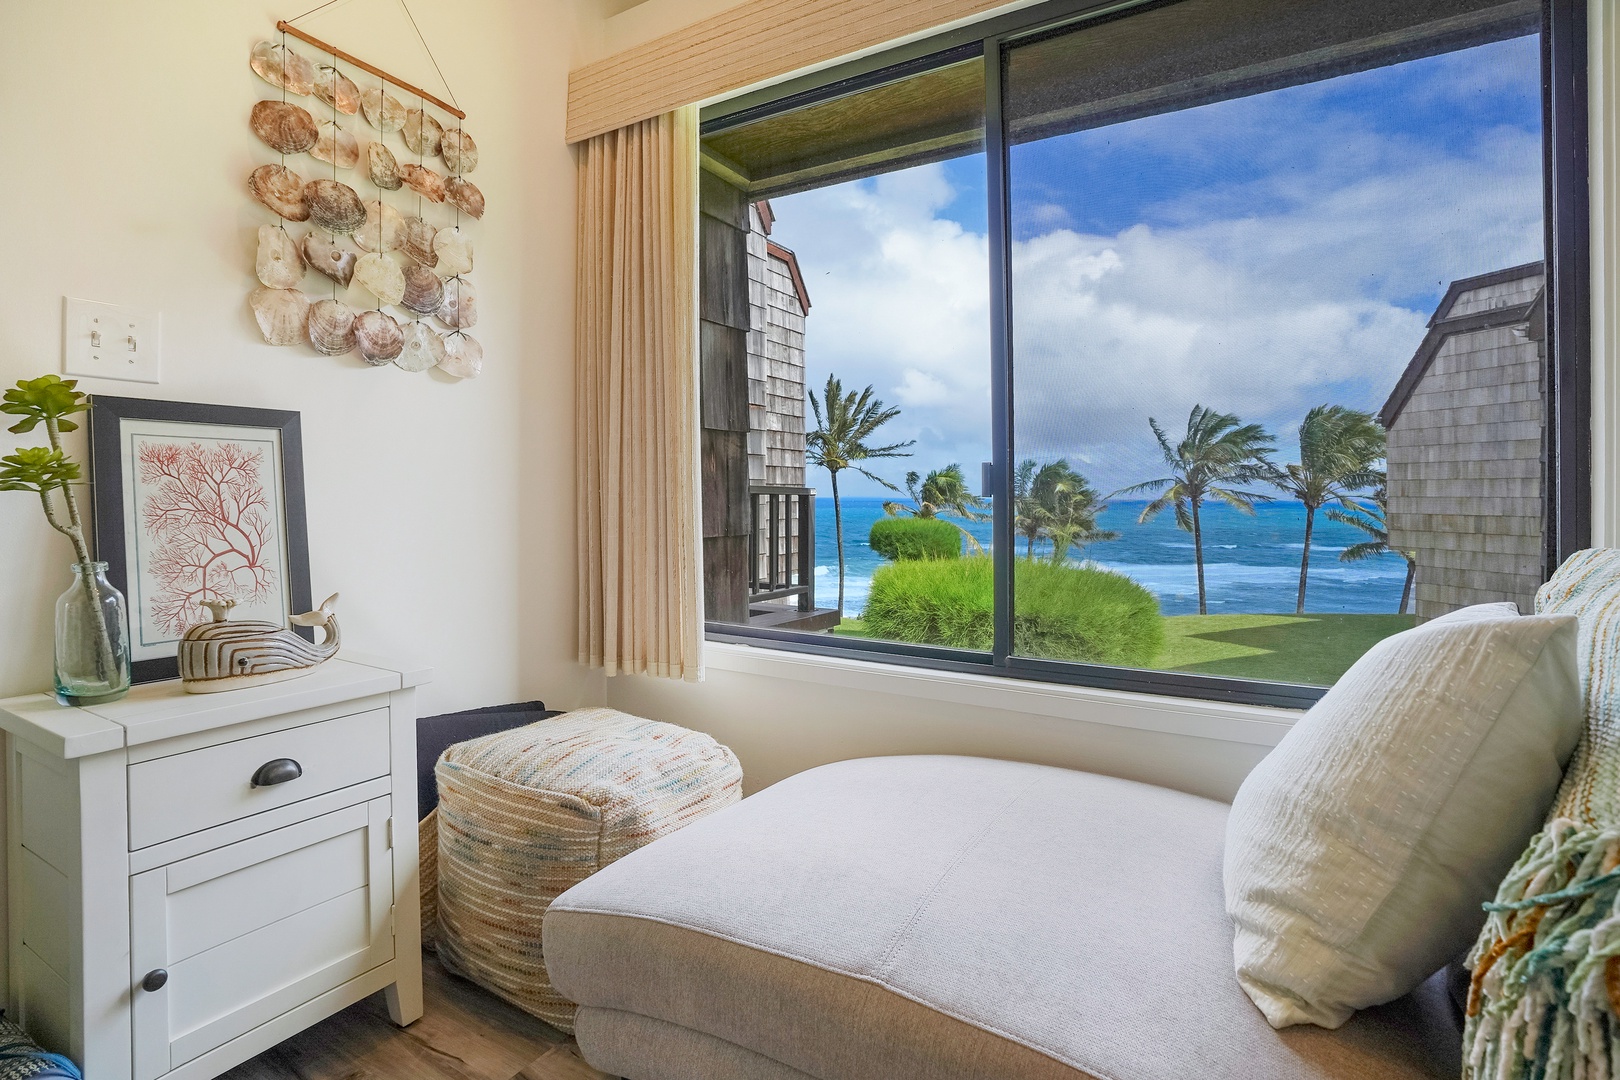 Princeville Vacation Rentals, Sealodge Villa H5 - Wake up to the sight of the Pacific